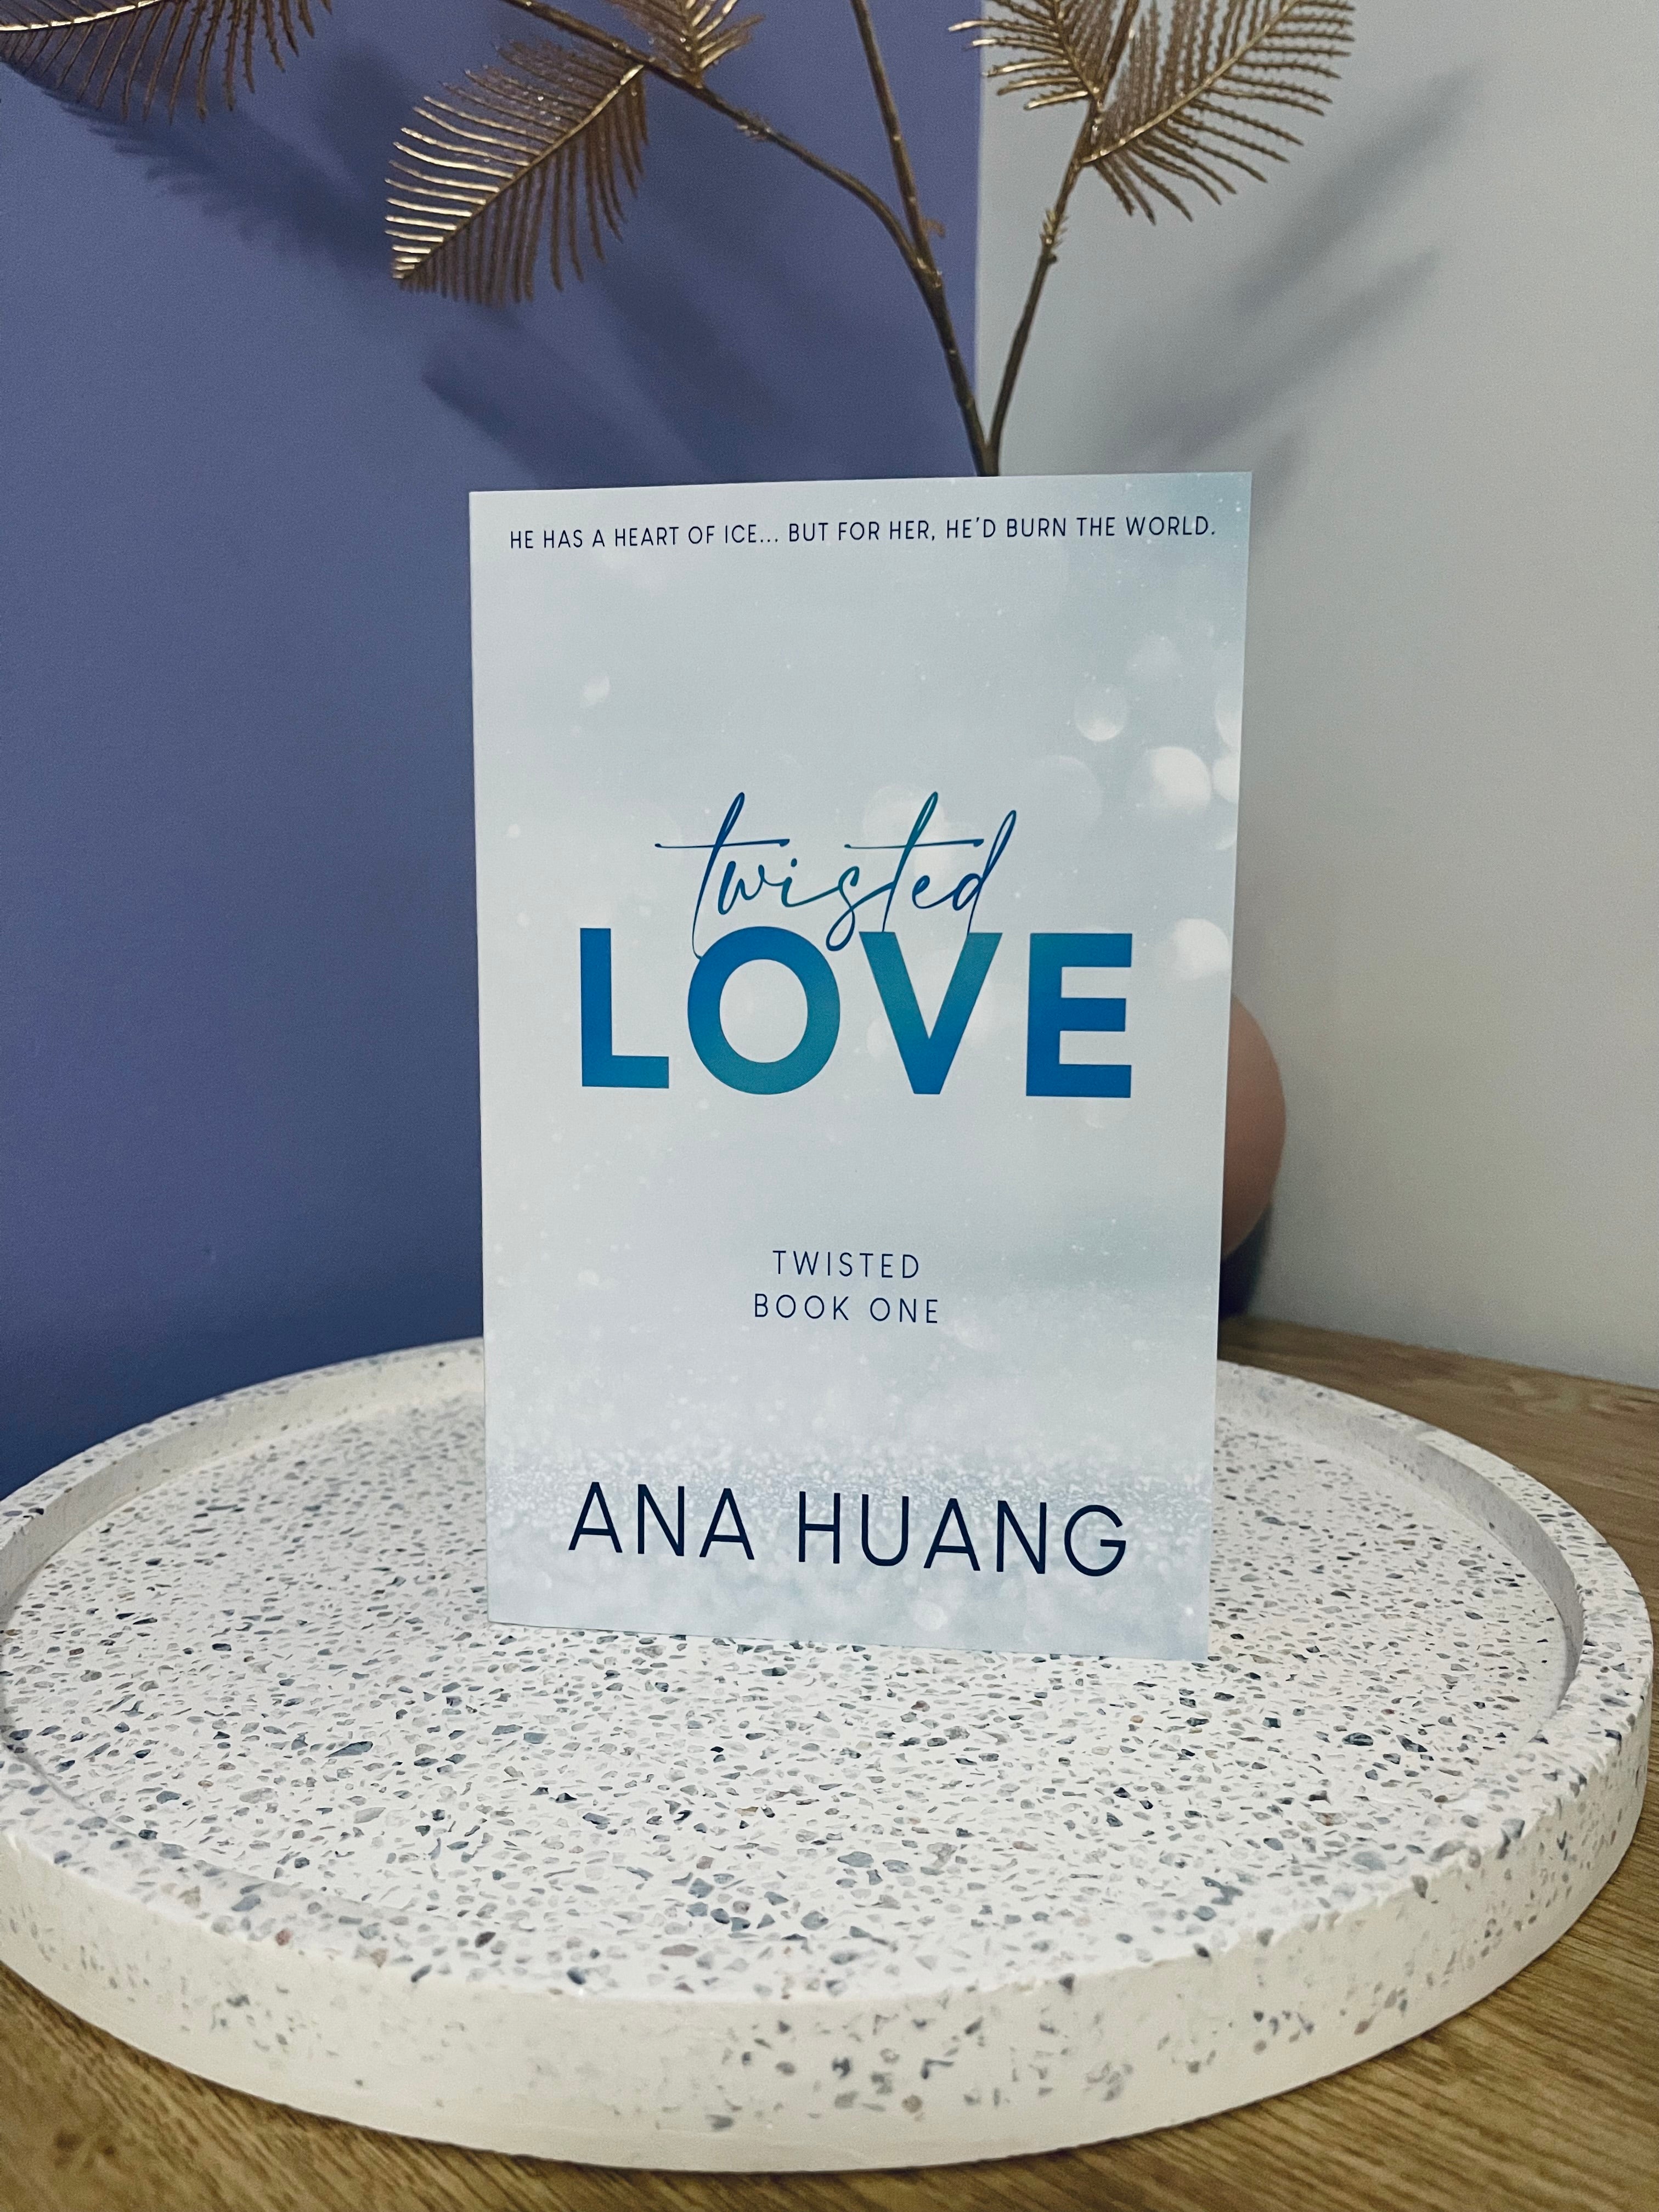 Twisted Love (Twisted, #1) by Ana Huang